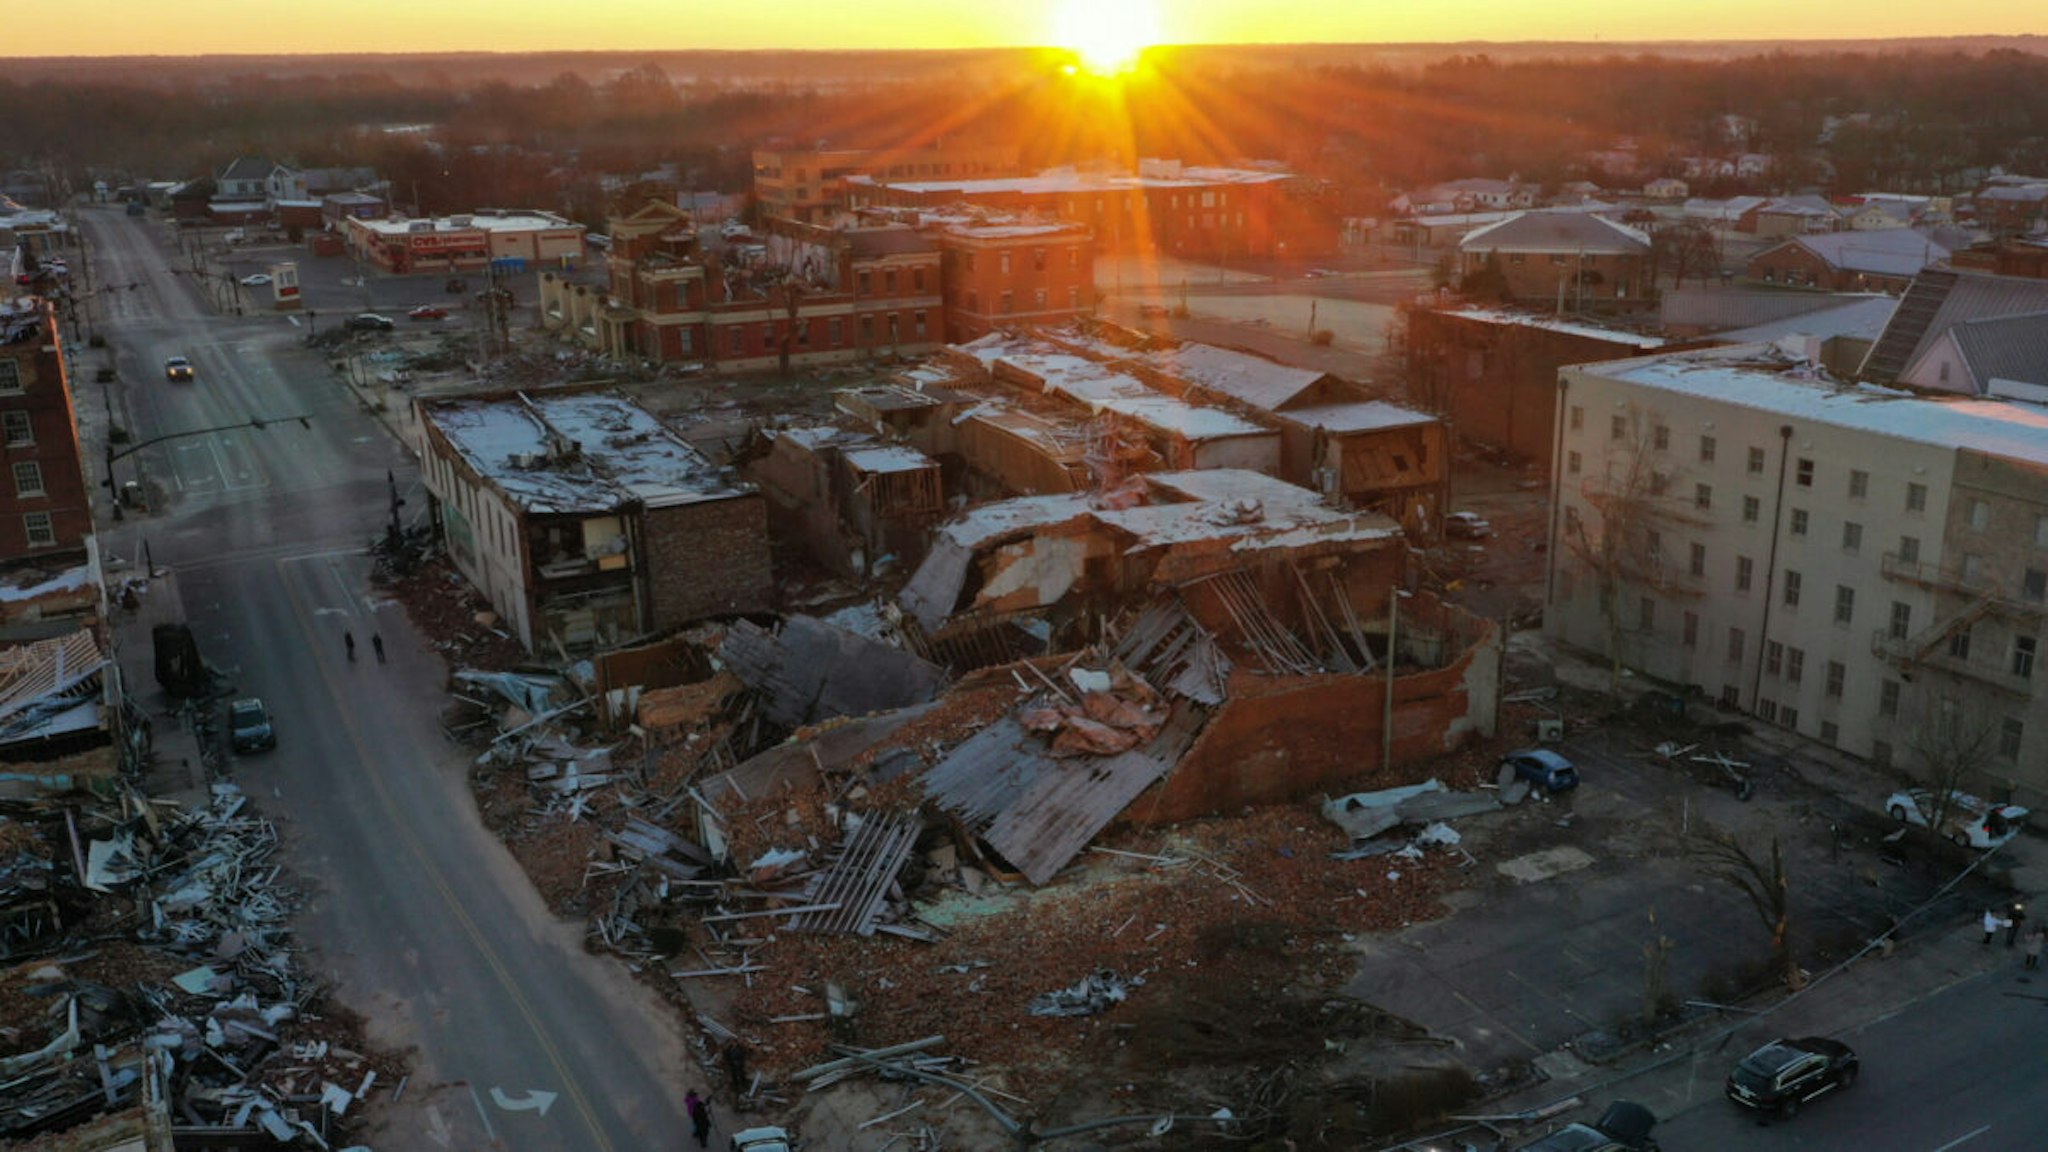 A drone photo shows an aerial view of the damage caused by tornadoes in Mayfield, Kentucky, United States on December 12, 2021.